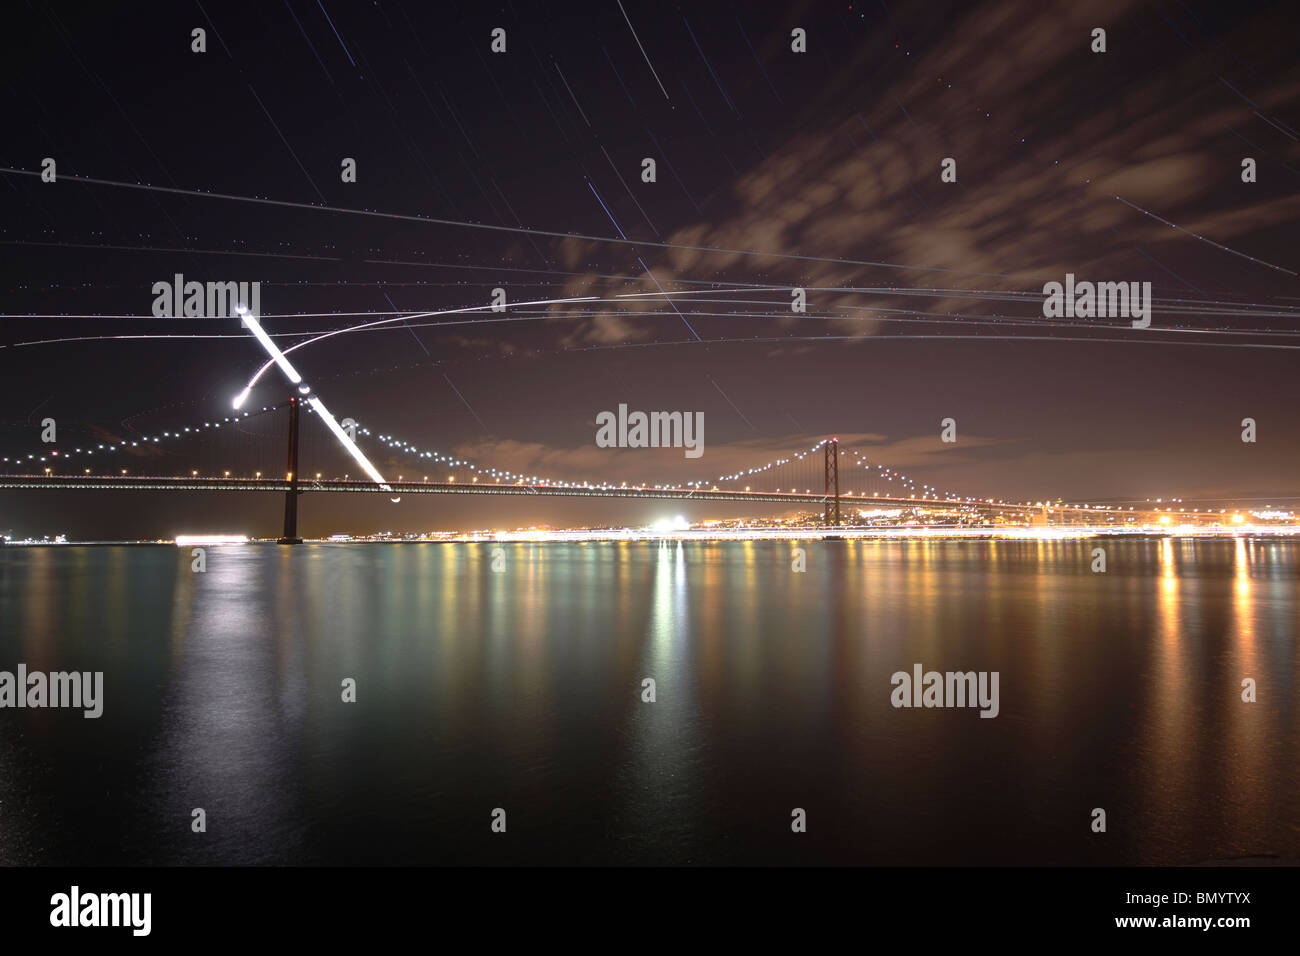 The path of the crescent moon as it sets over the Ponte 25 de Abril bridge in Lisbon, Portugal. Stock Photo